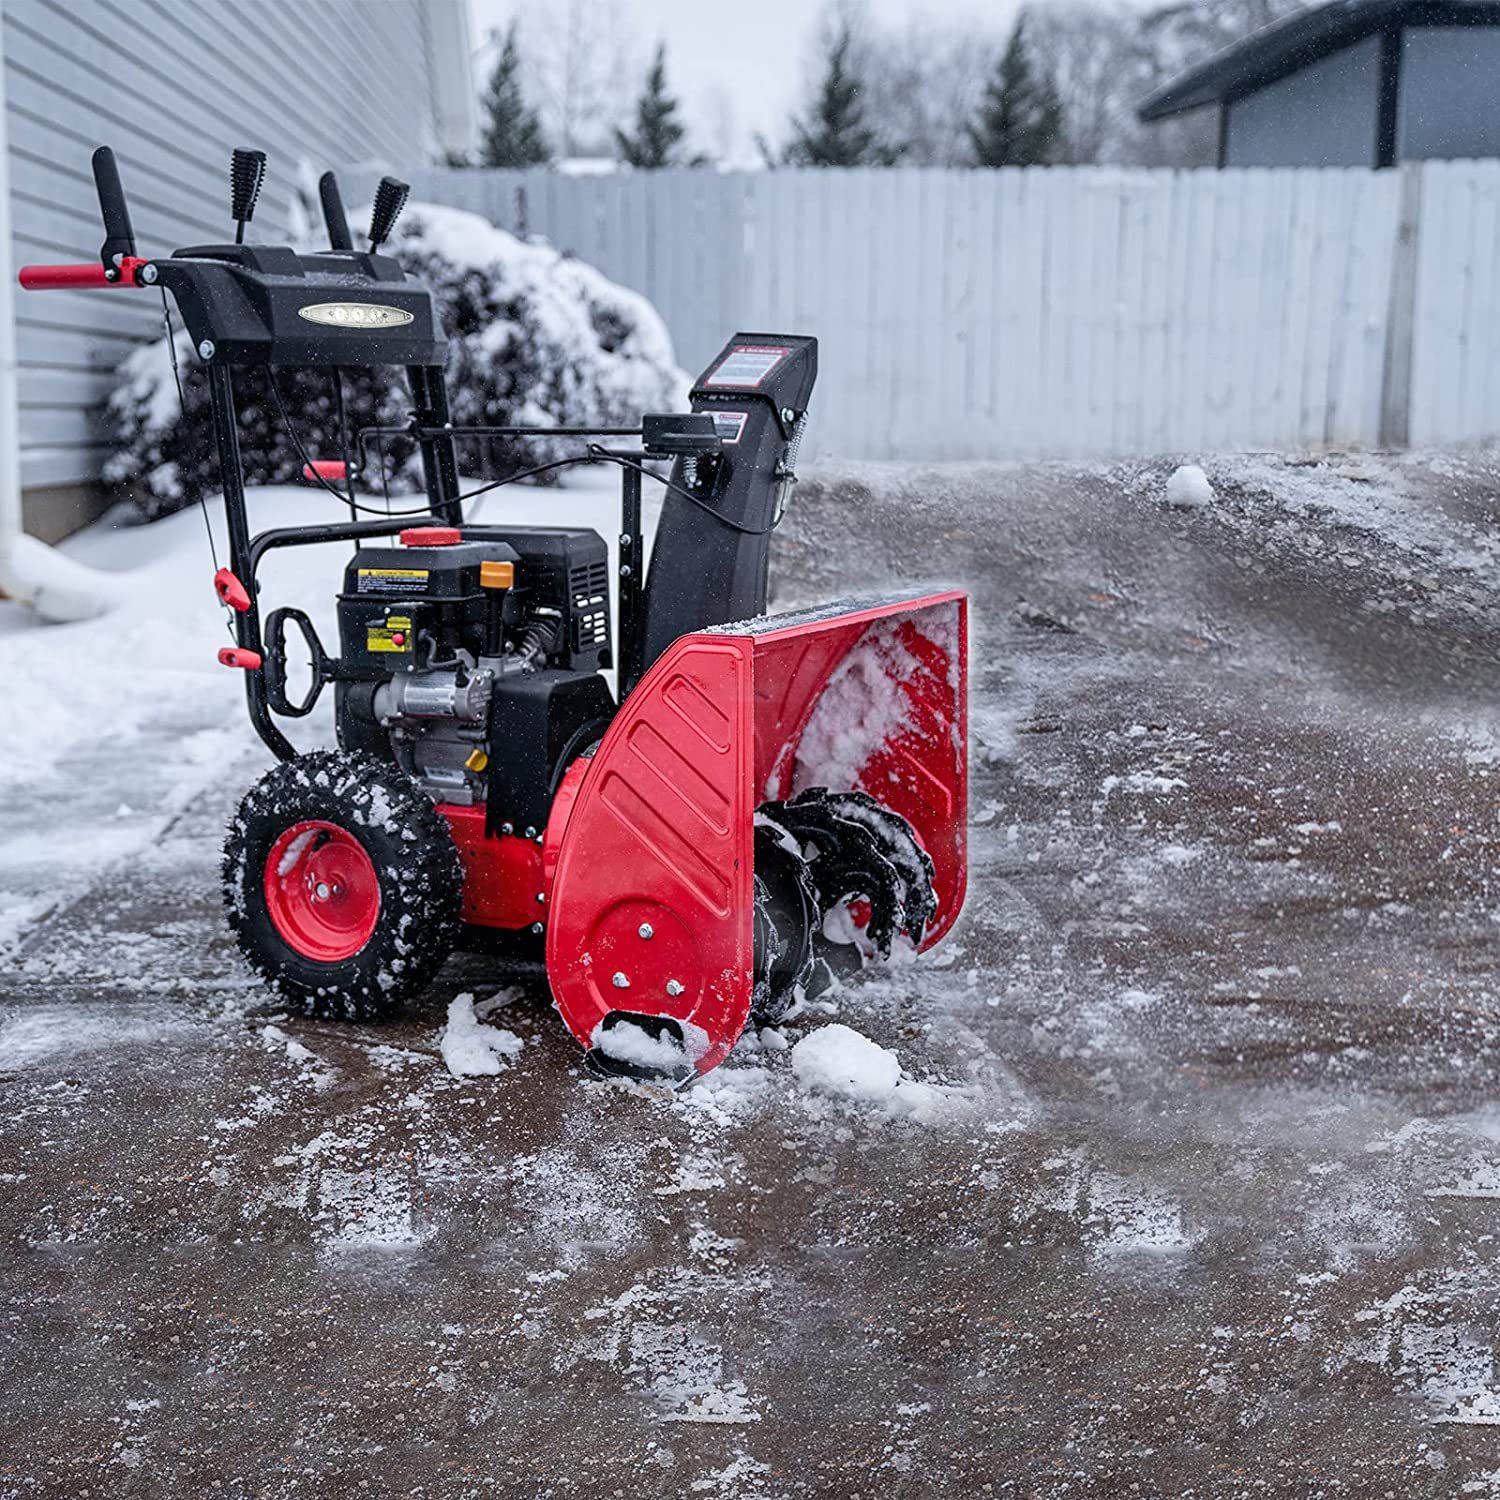 Top 20 Suppliers, Equipment, & Tools For Landscaping & Snow